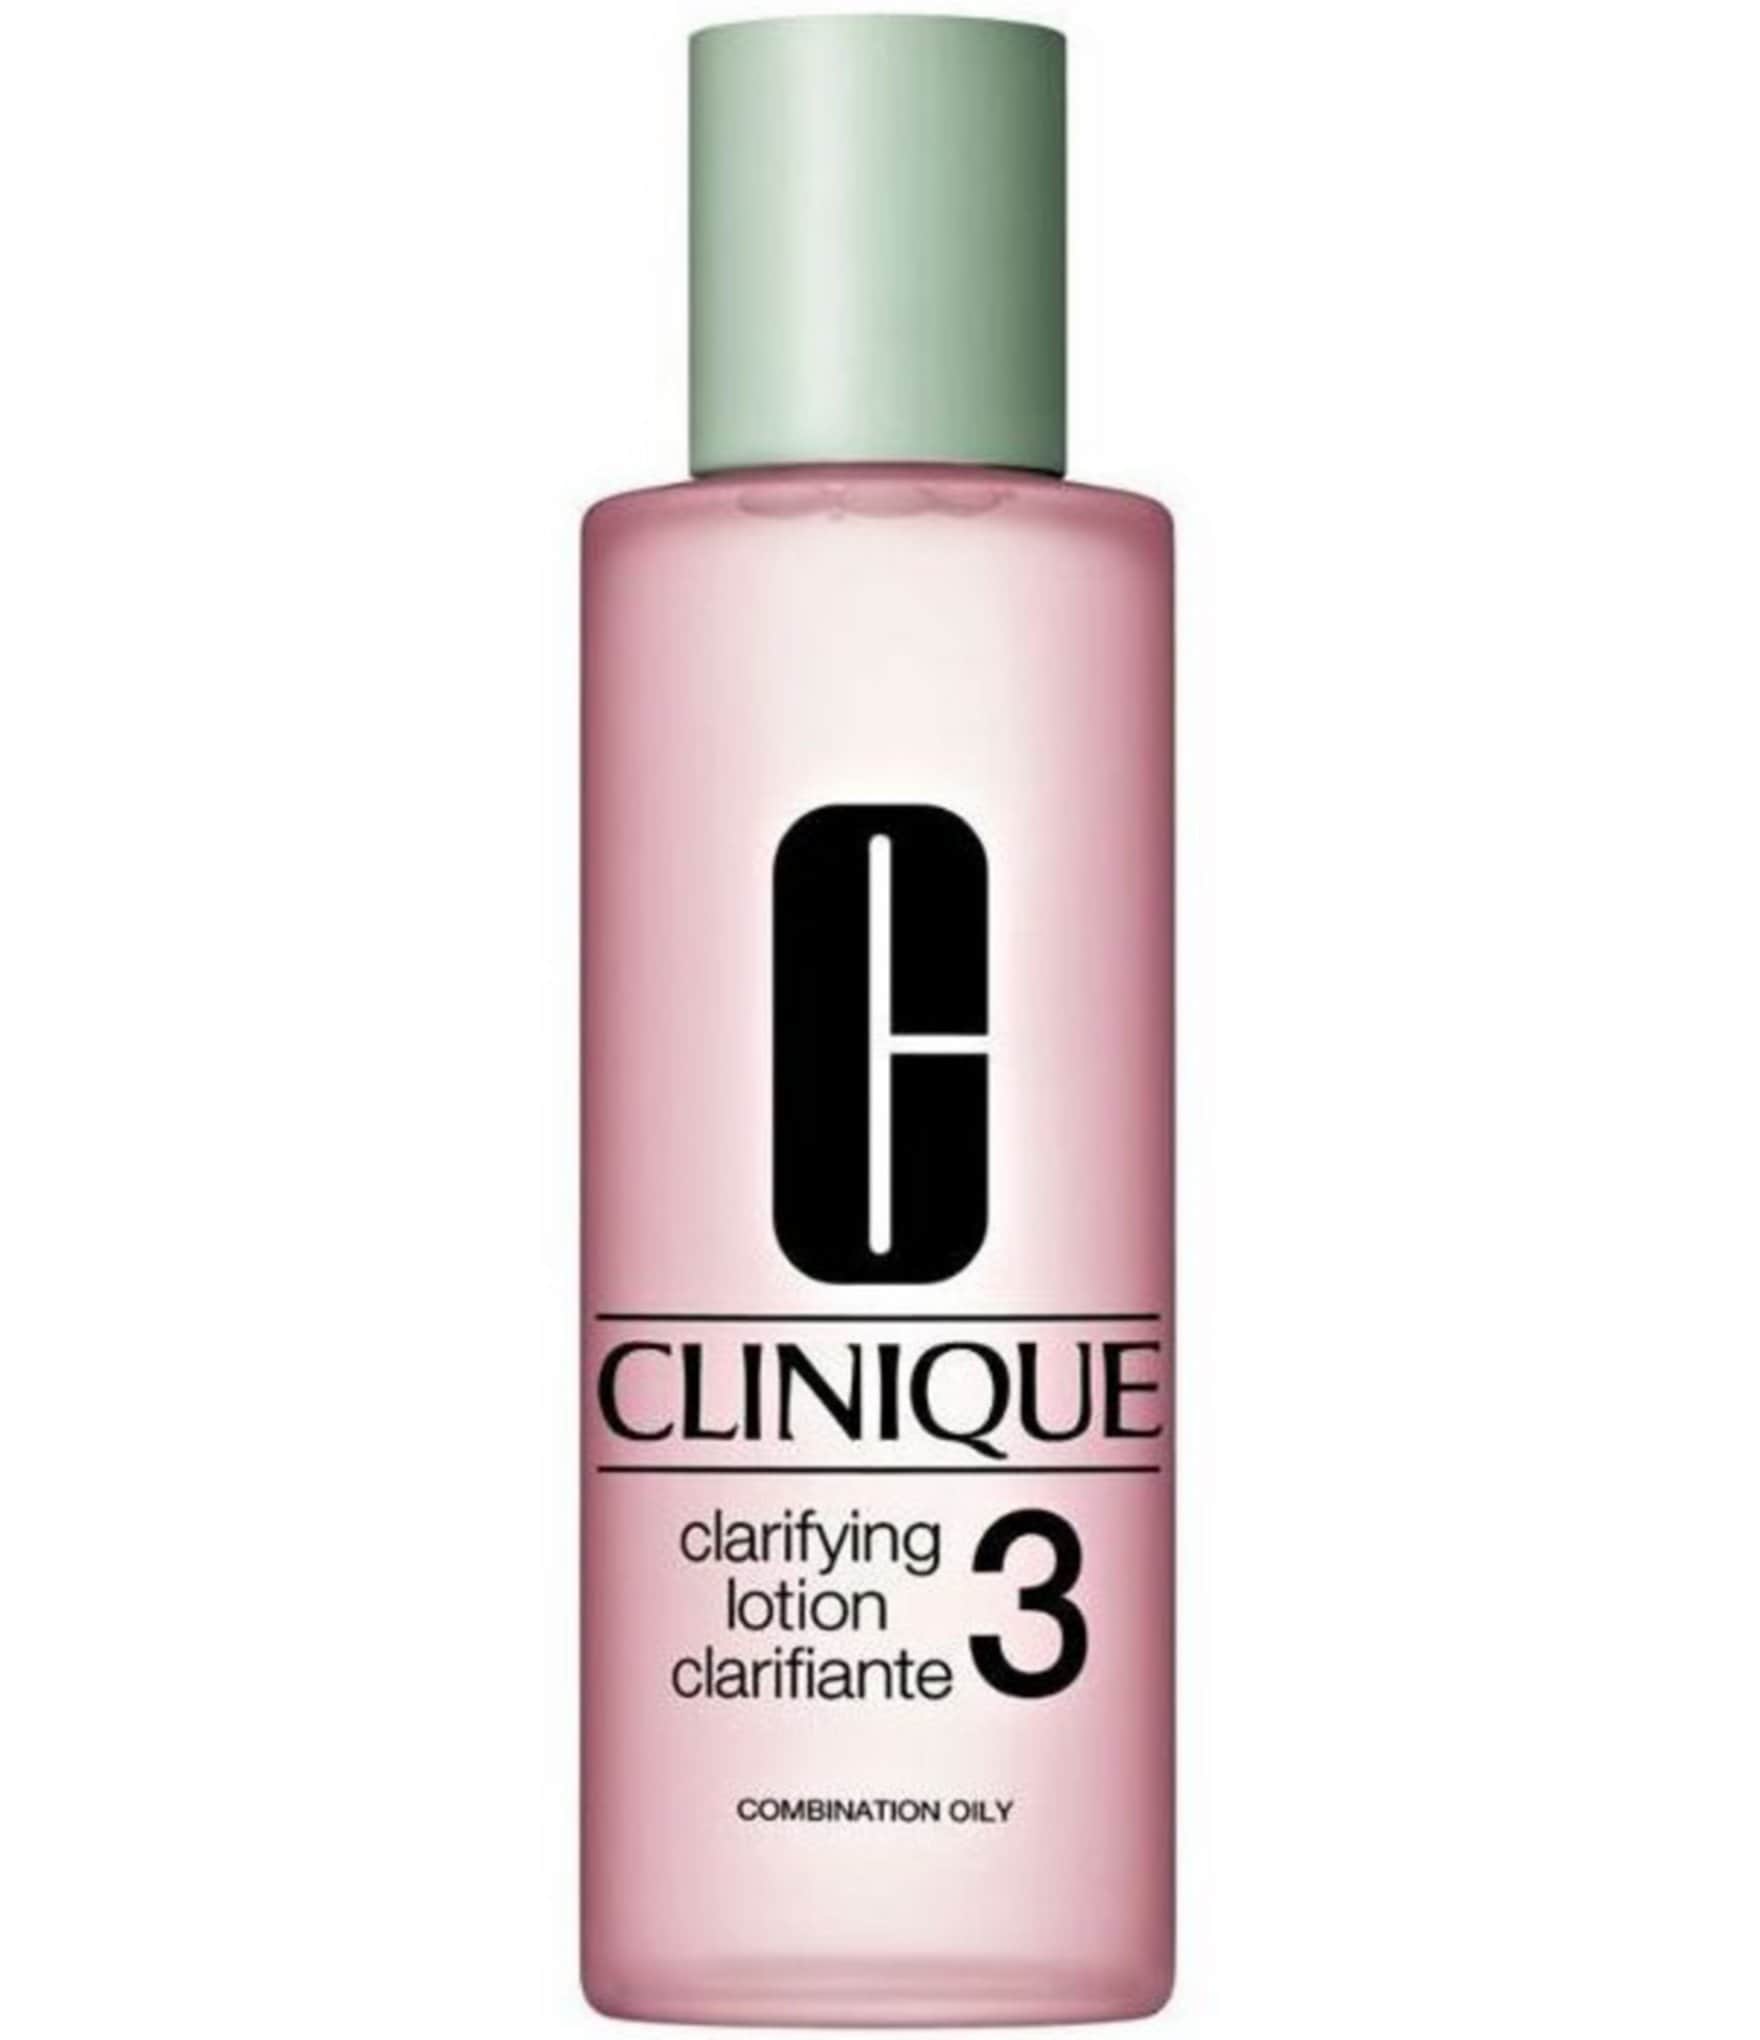 Clinique Clarifying Lotion 3 for Combination Oily Dillard's